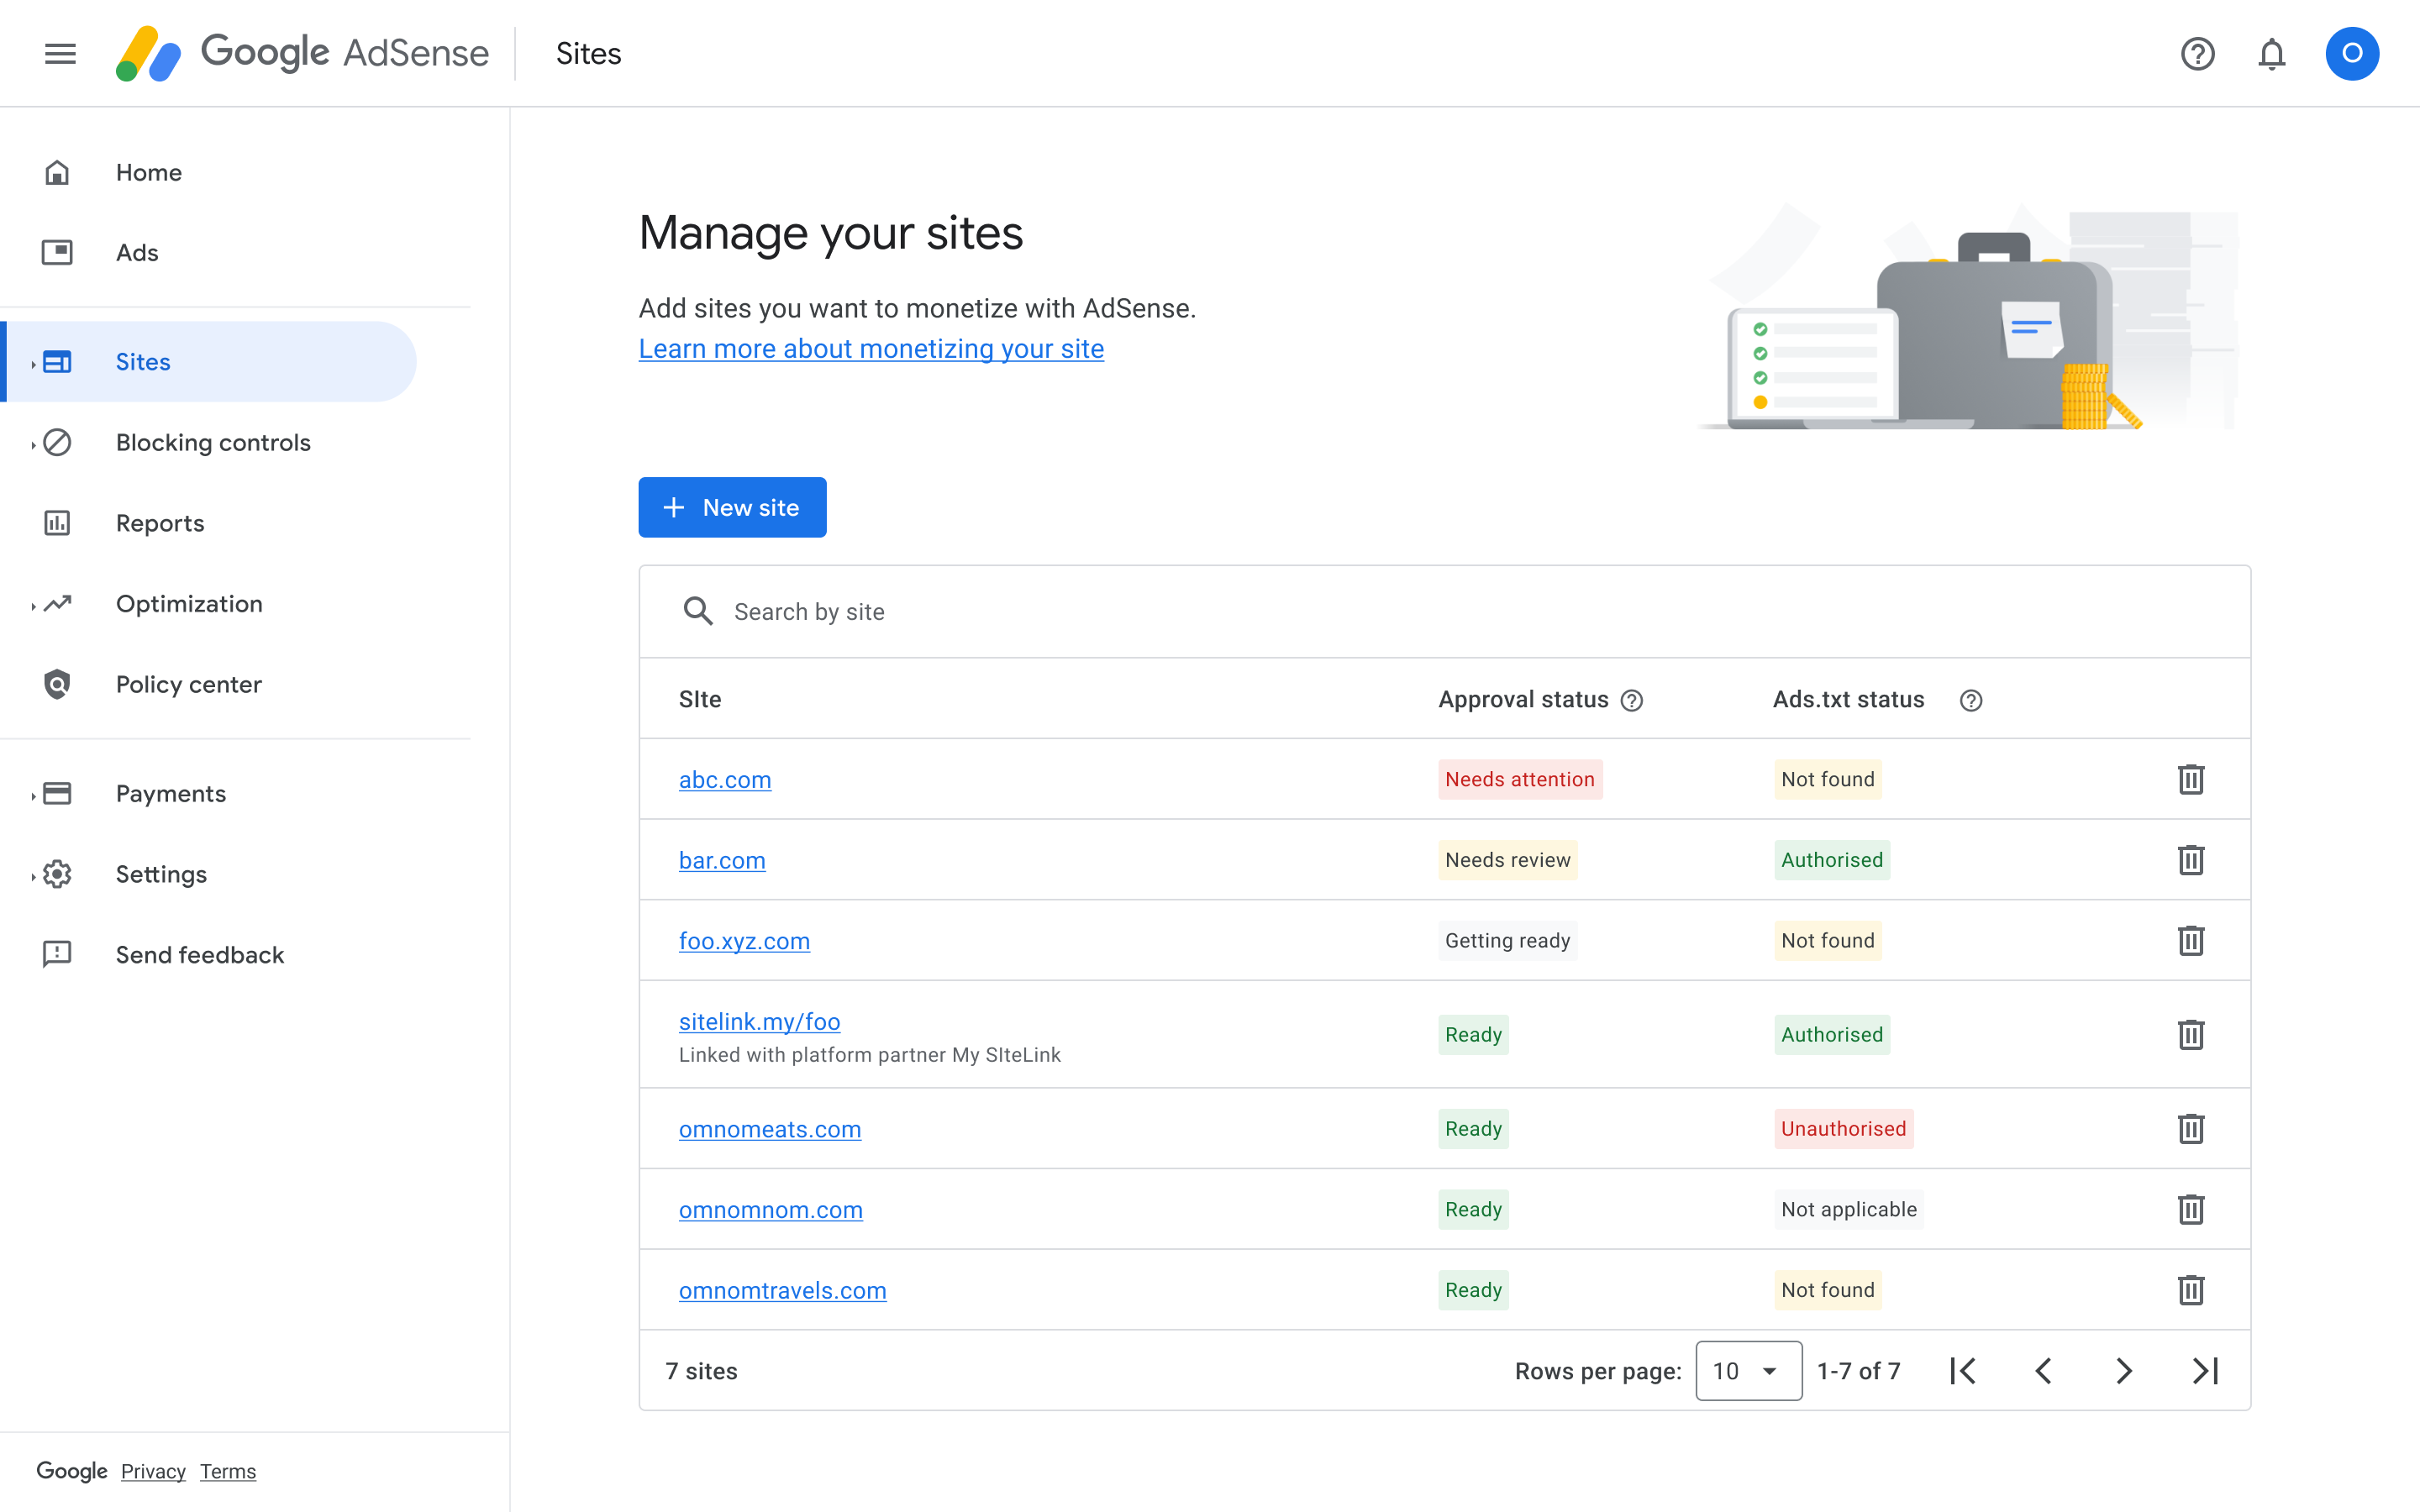 manage your sites